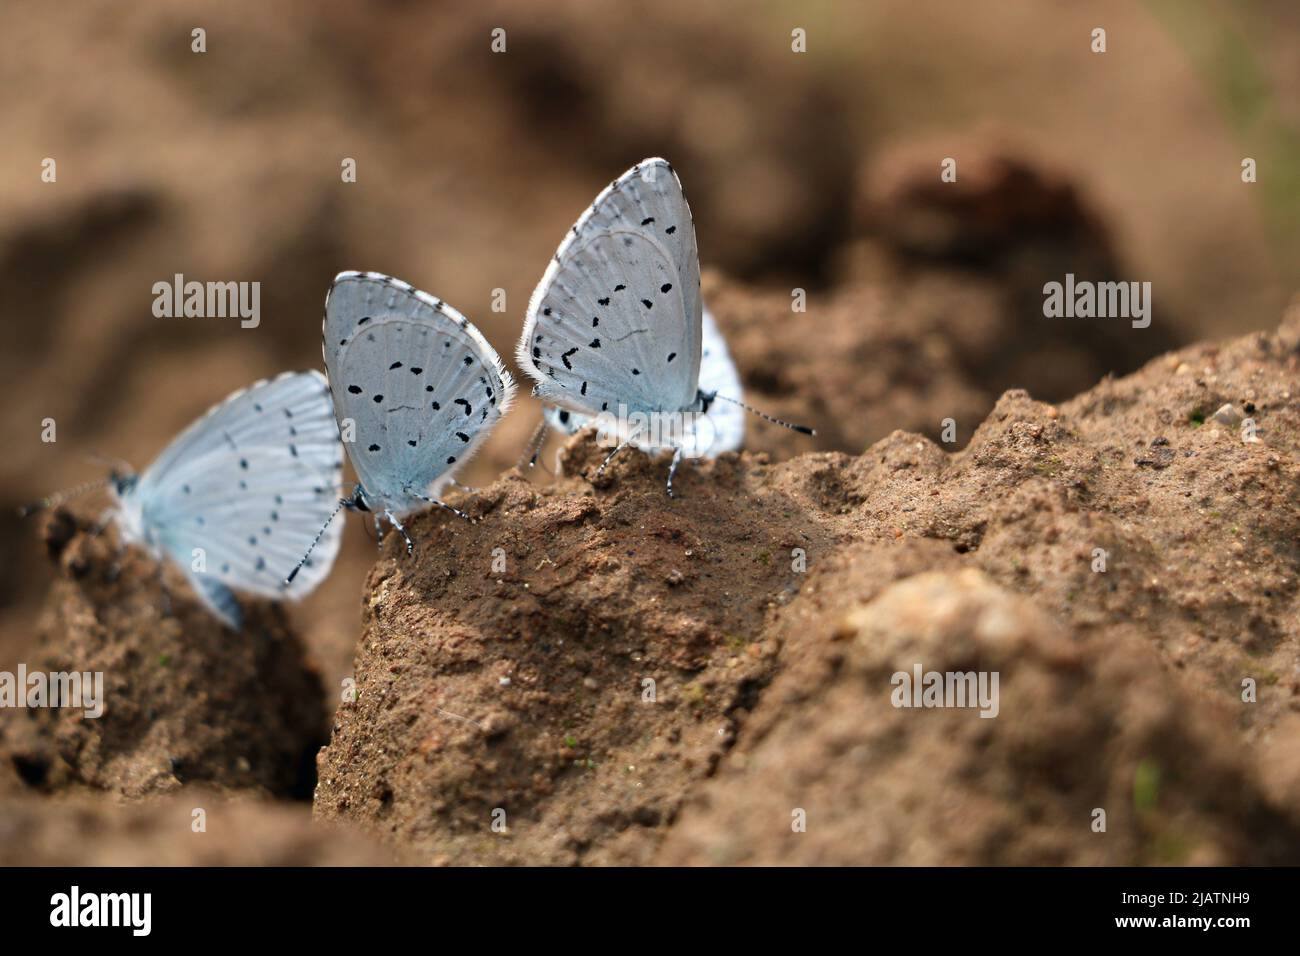 Large group of Celastrina argiolus, Holly Blue butterflies feeding on a ground Stock Photo